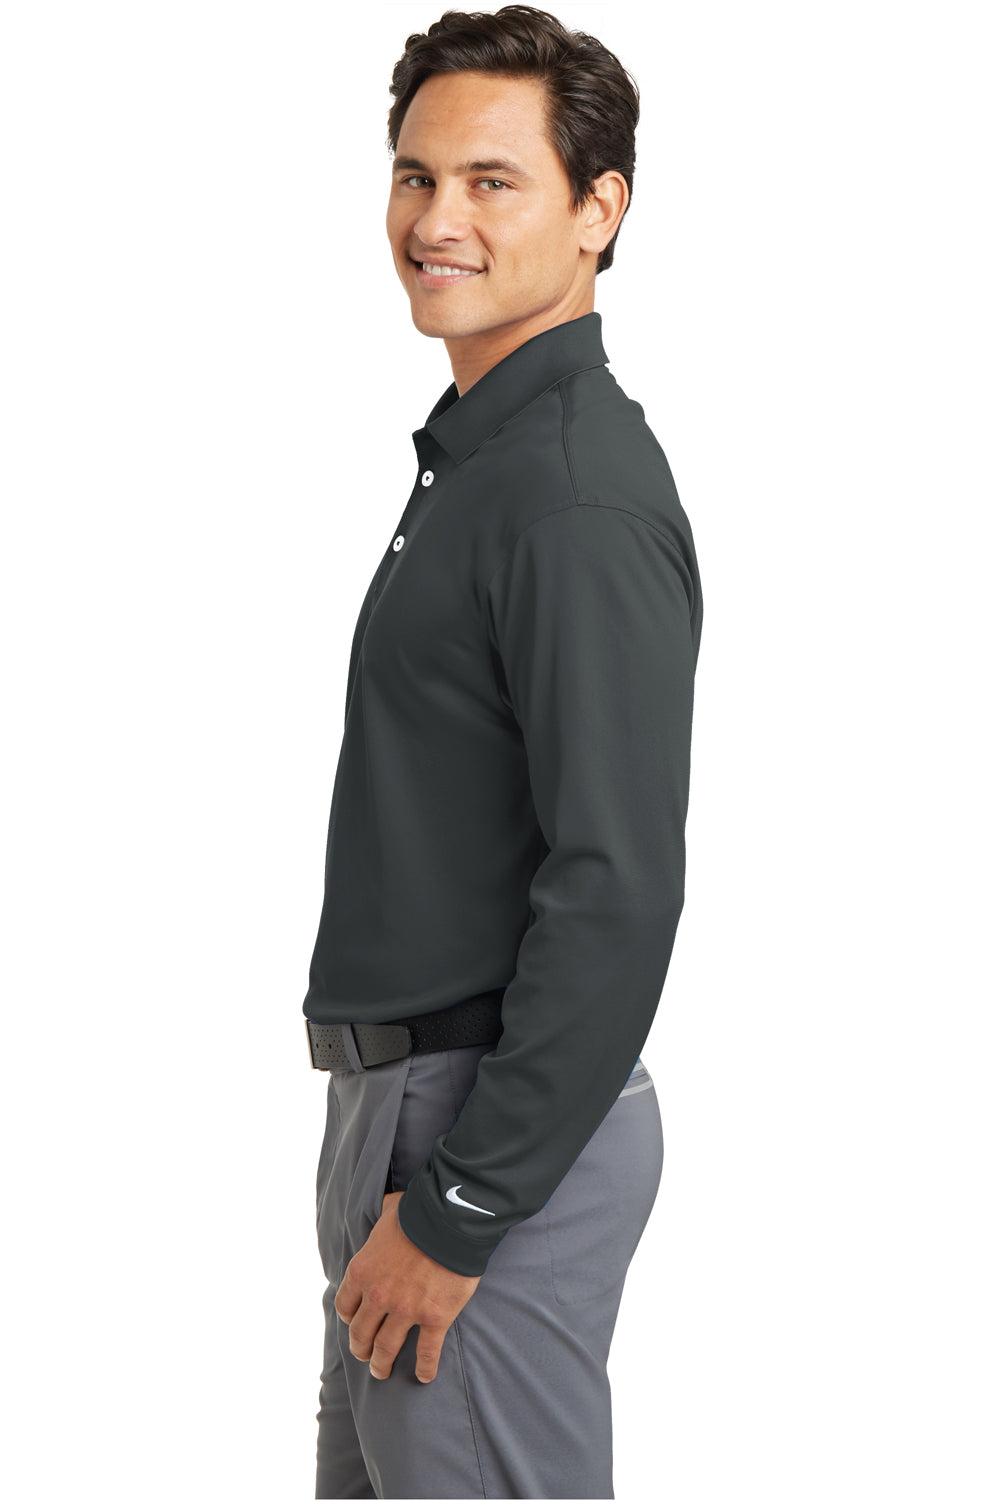 Nike 466364/604940 Mens Stretch Tech Dri-Fit Moisture Wicking Long Sleeve Polo Shirt Anthracite Grey Model Side